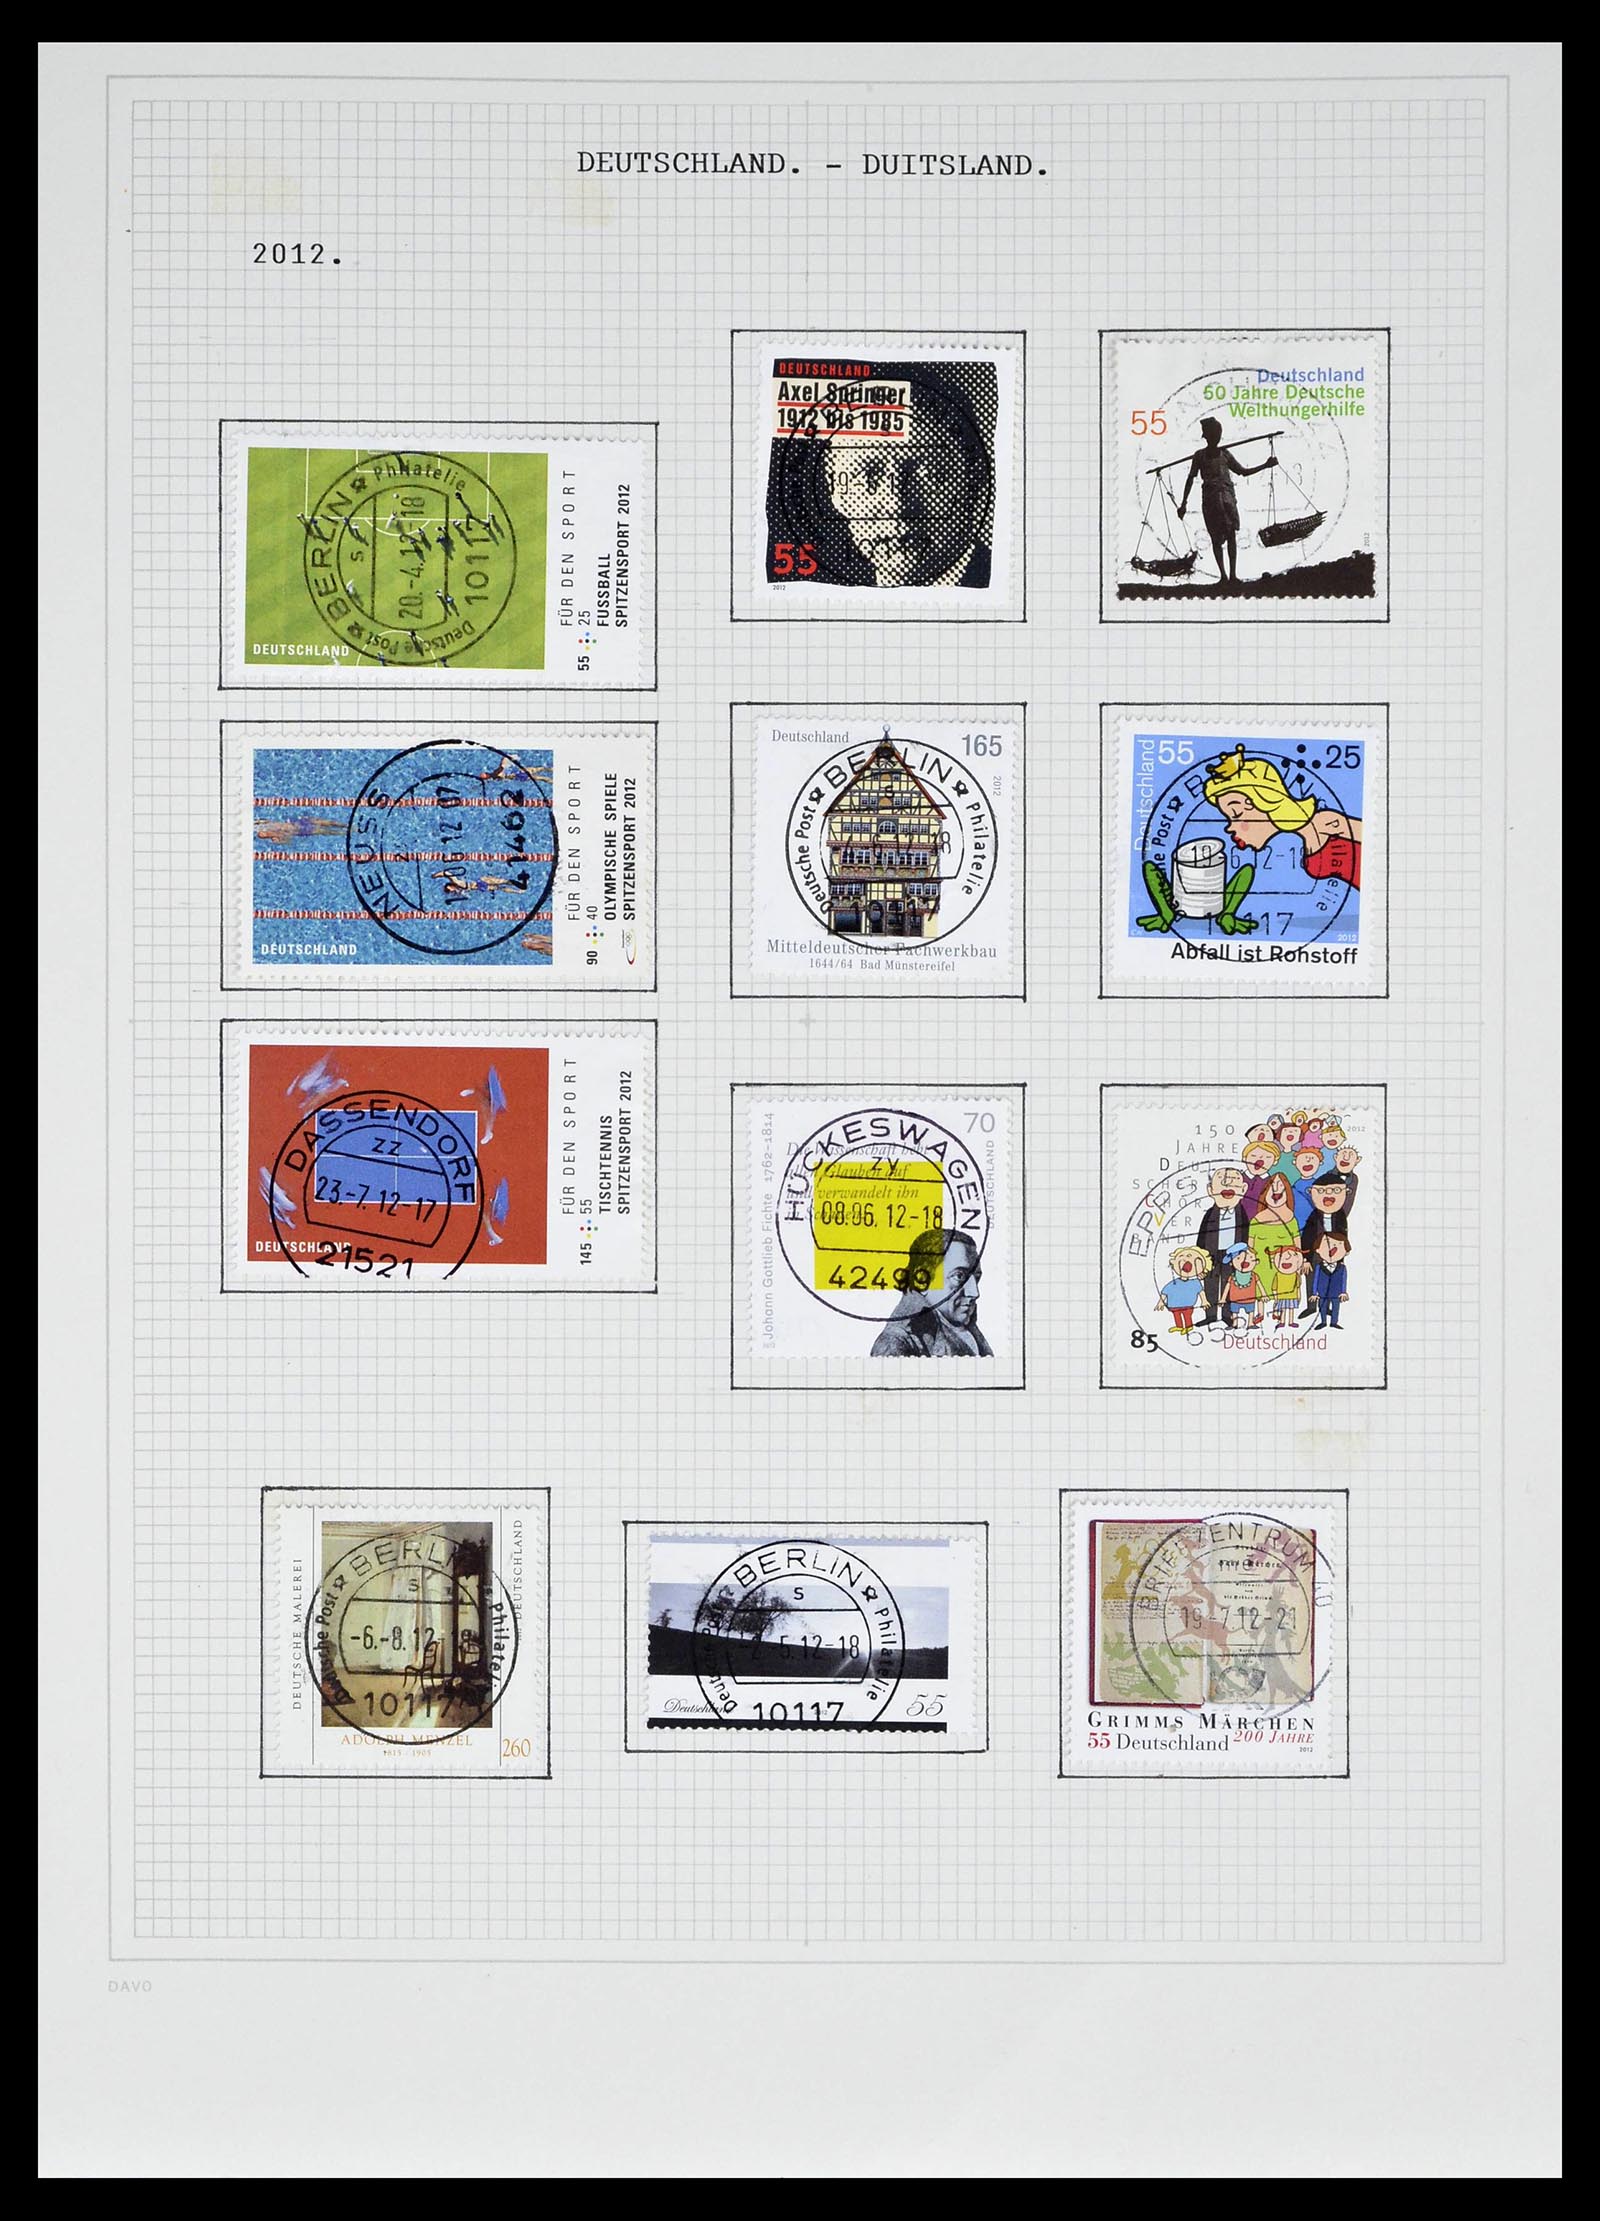 39324 0208 - Stamp collection 39324 Bundespost 1986-2012.